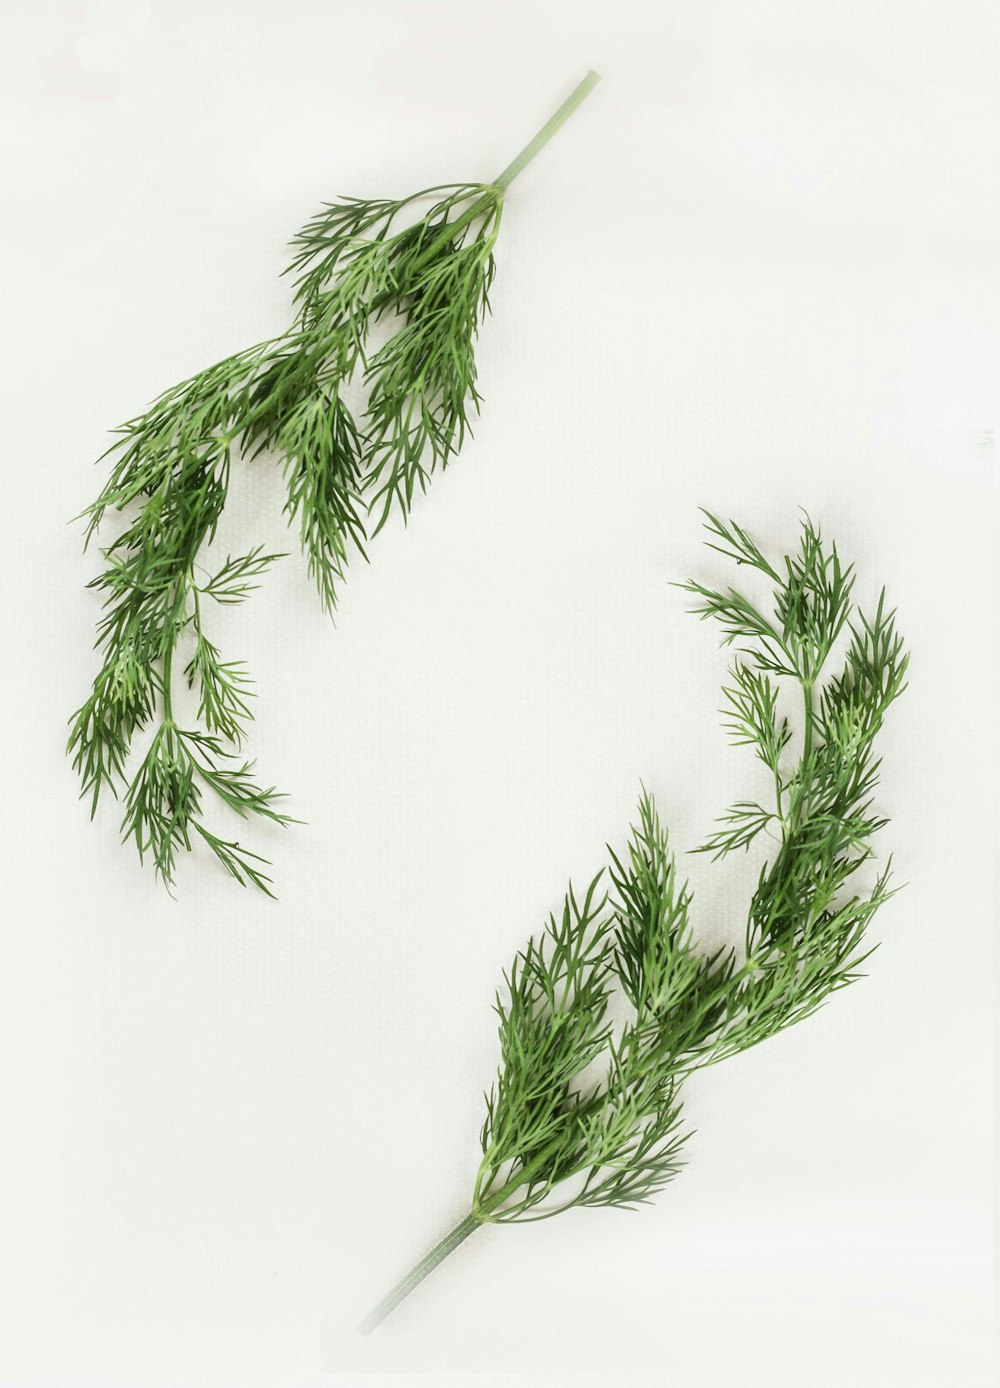 green leafed plants on white background